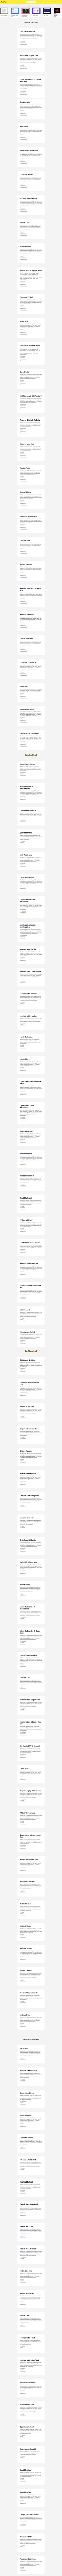 Font Pair - Helps designers pair Google Fonts together. Beautiful Google Font combinations and pair…